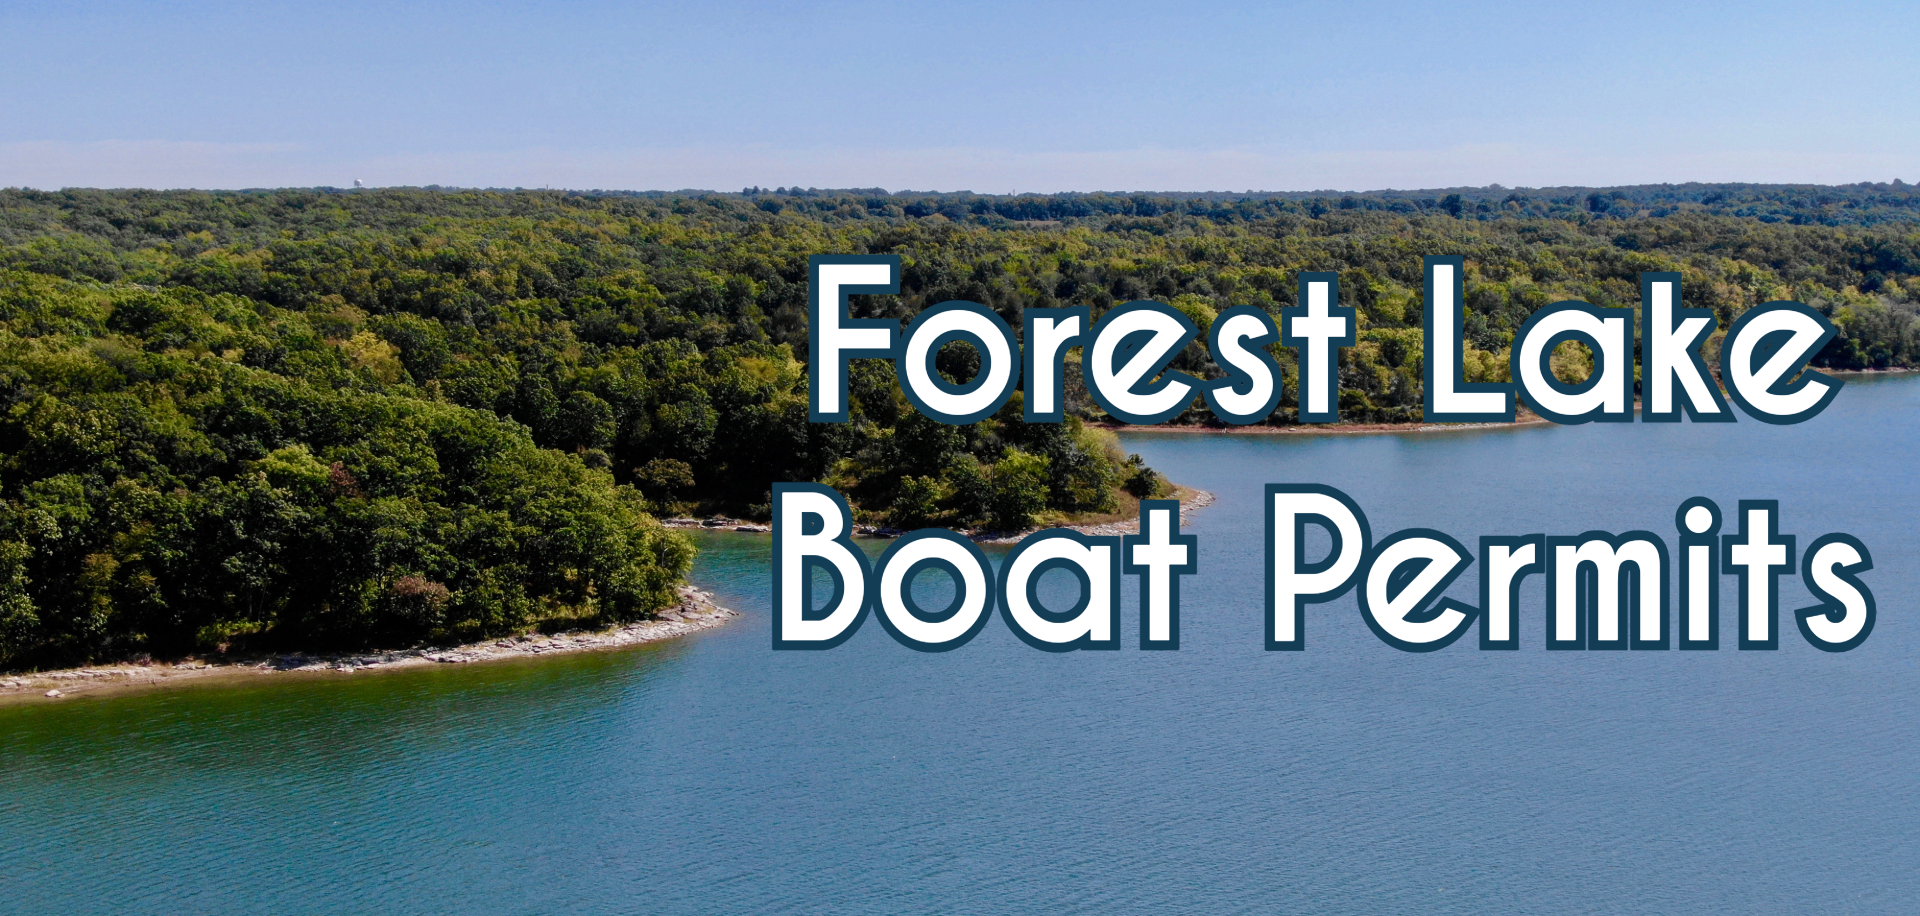 Get a boat permit For Forest Lake